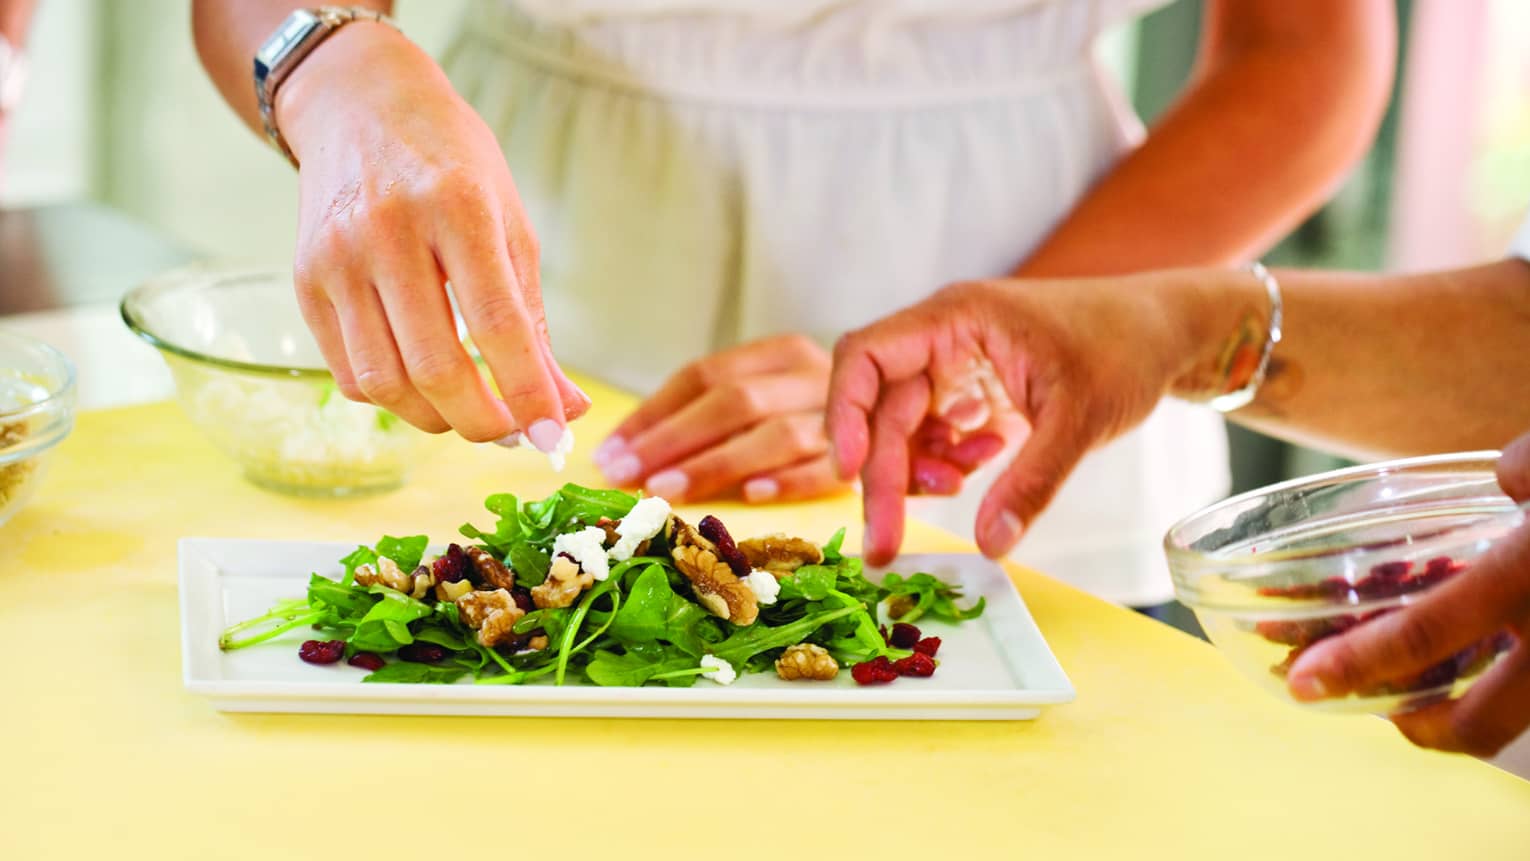 Two people making a salad on a white plate.